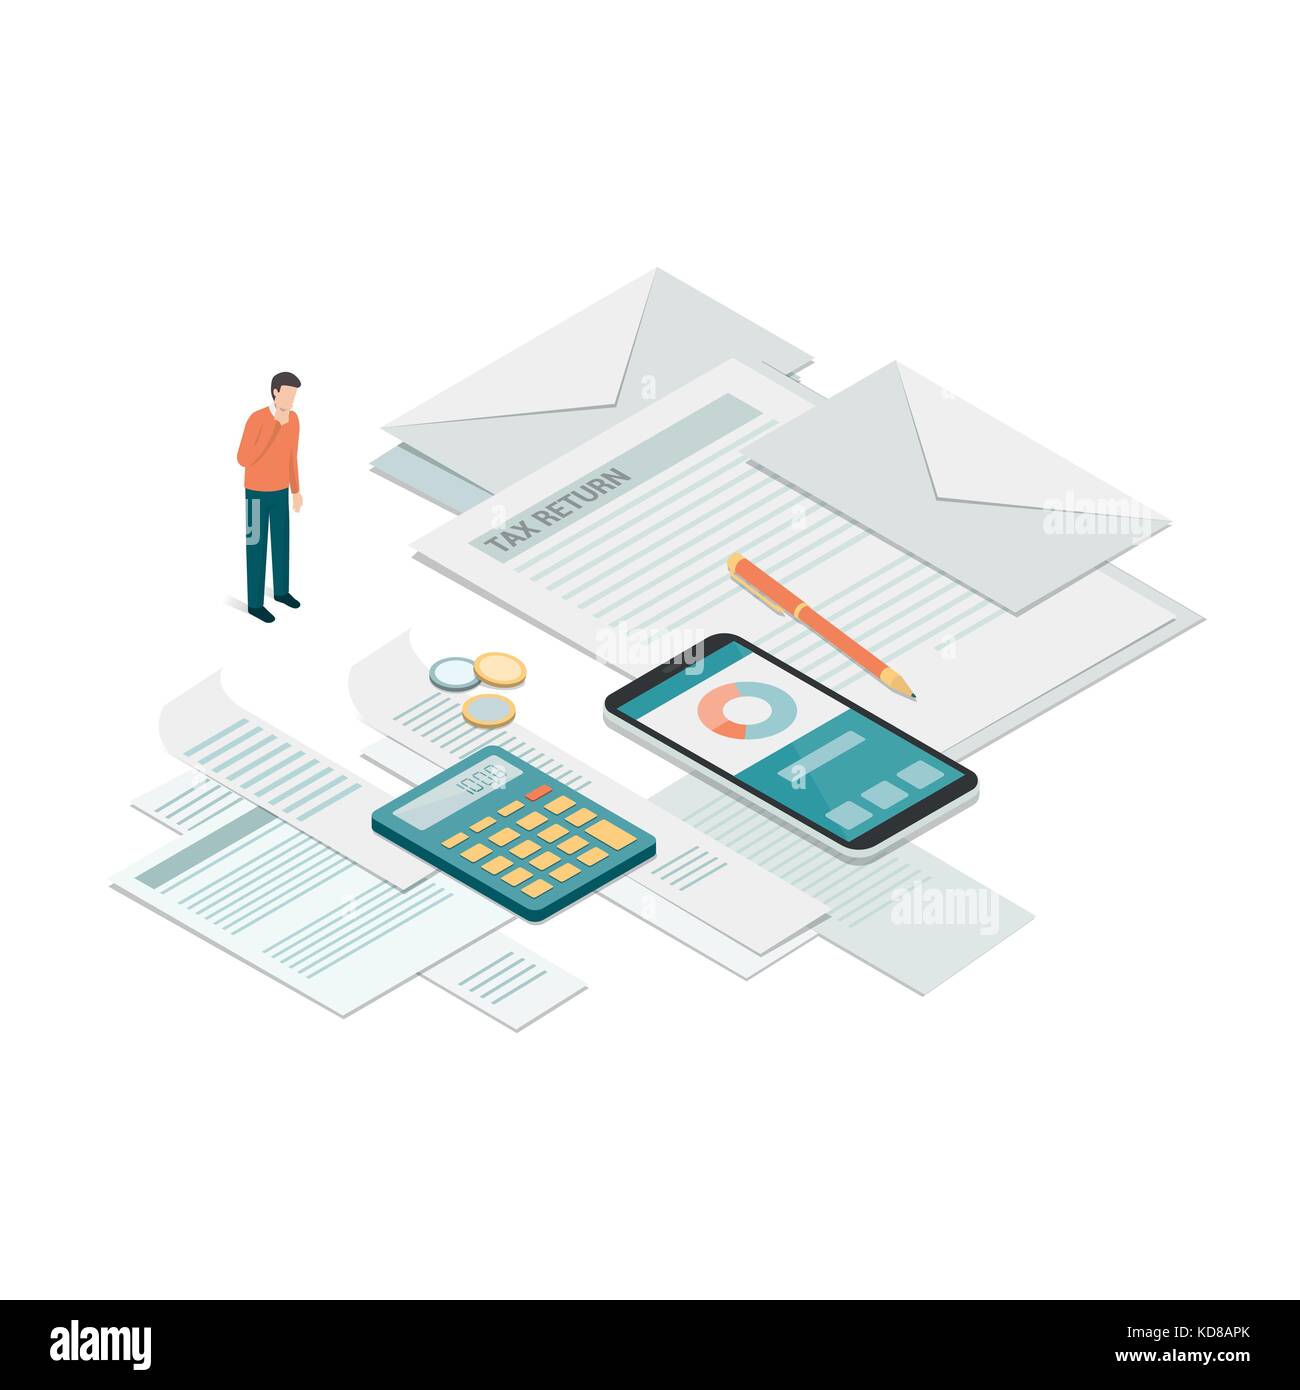 Businessman checking bills, invoices and tax forms: payments, accounting and business management concept Stock Vector